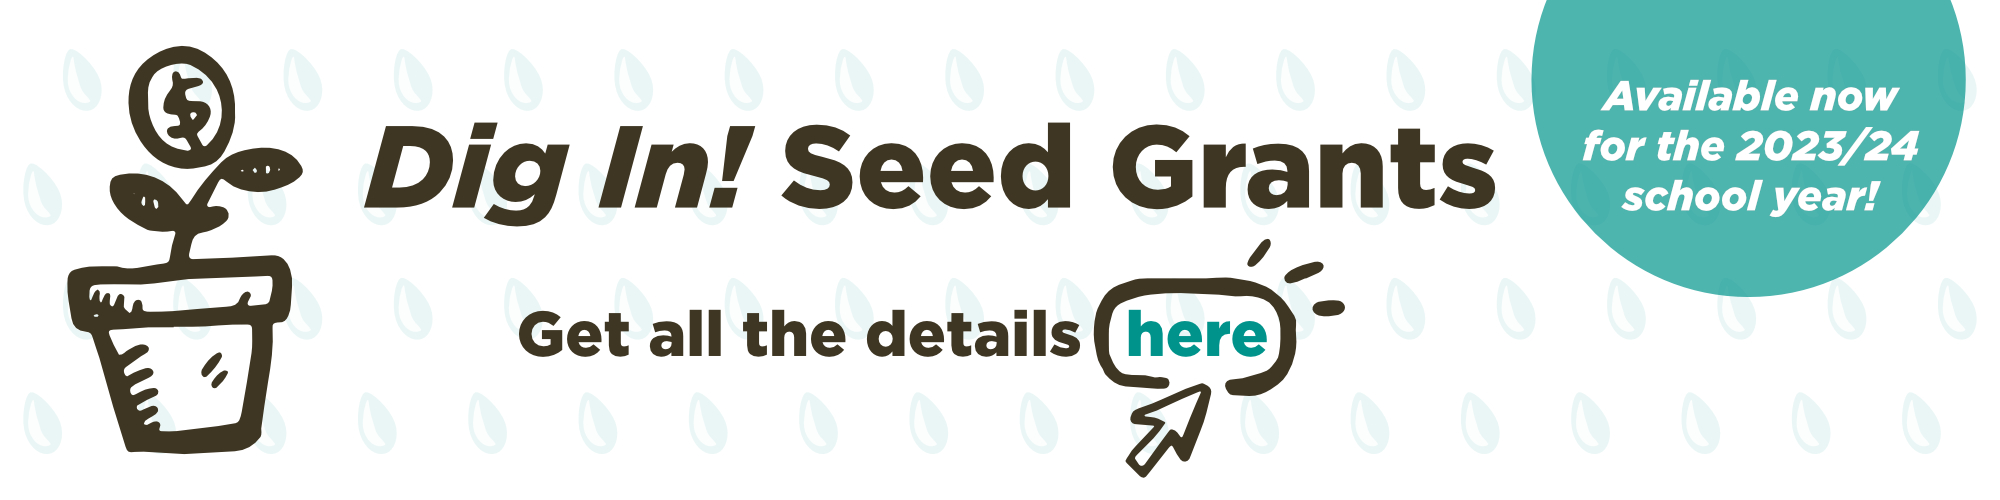 2023 Seed Grant Banner